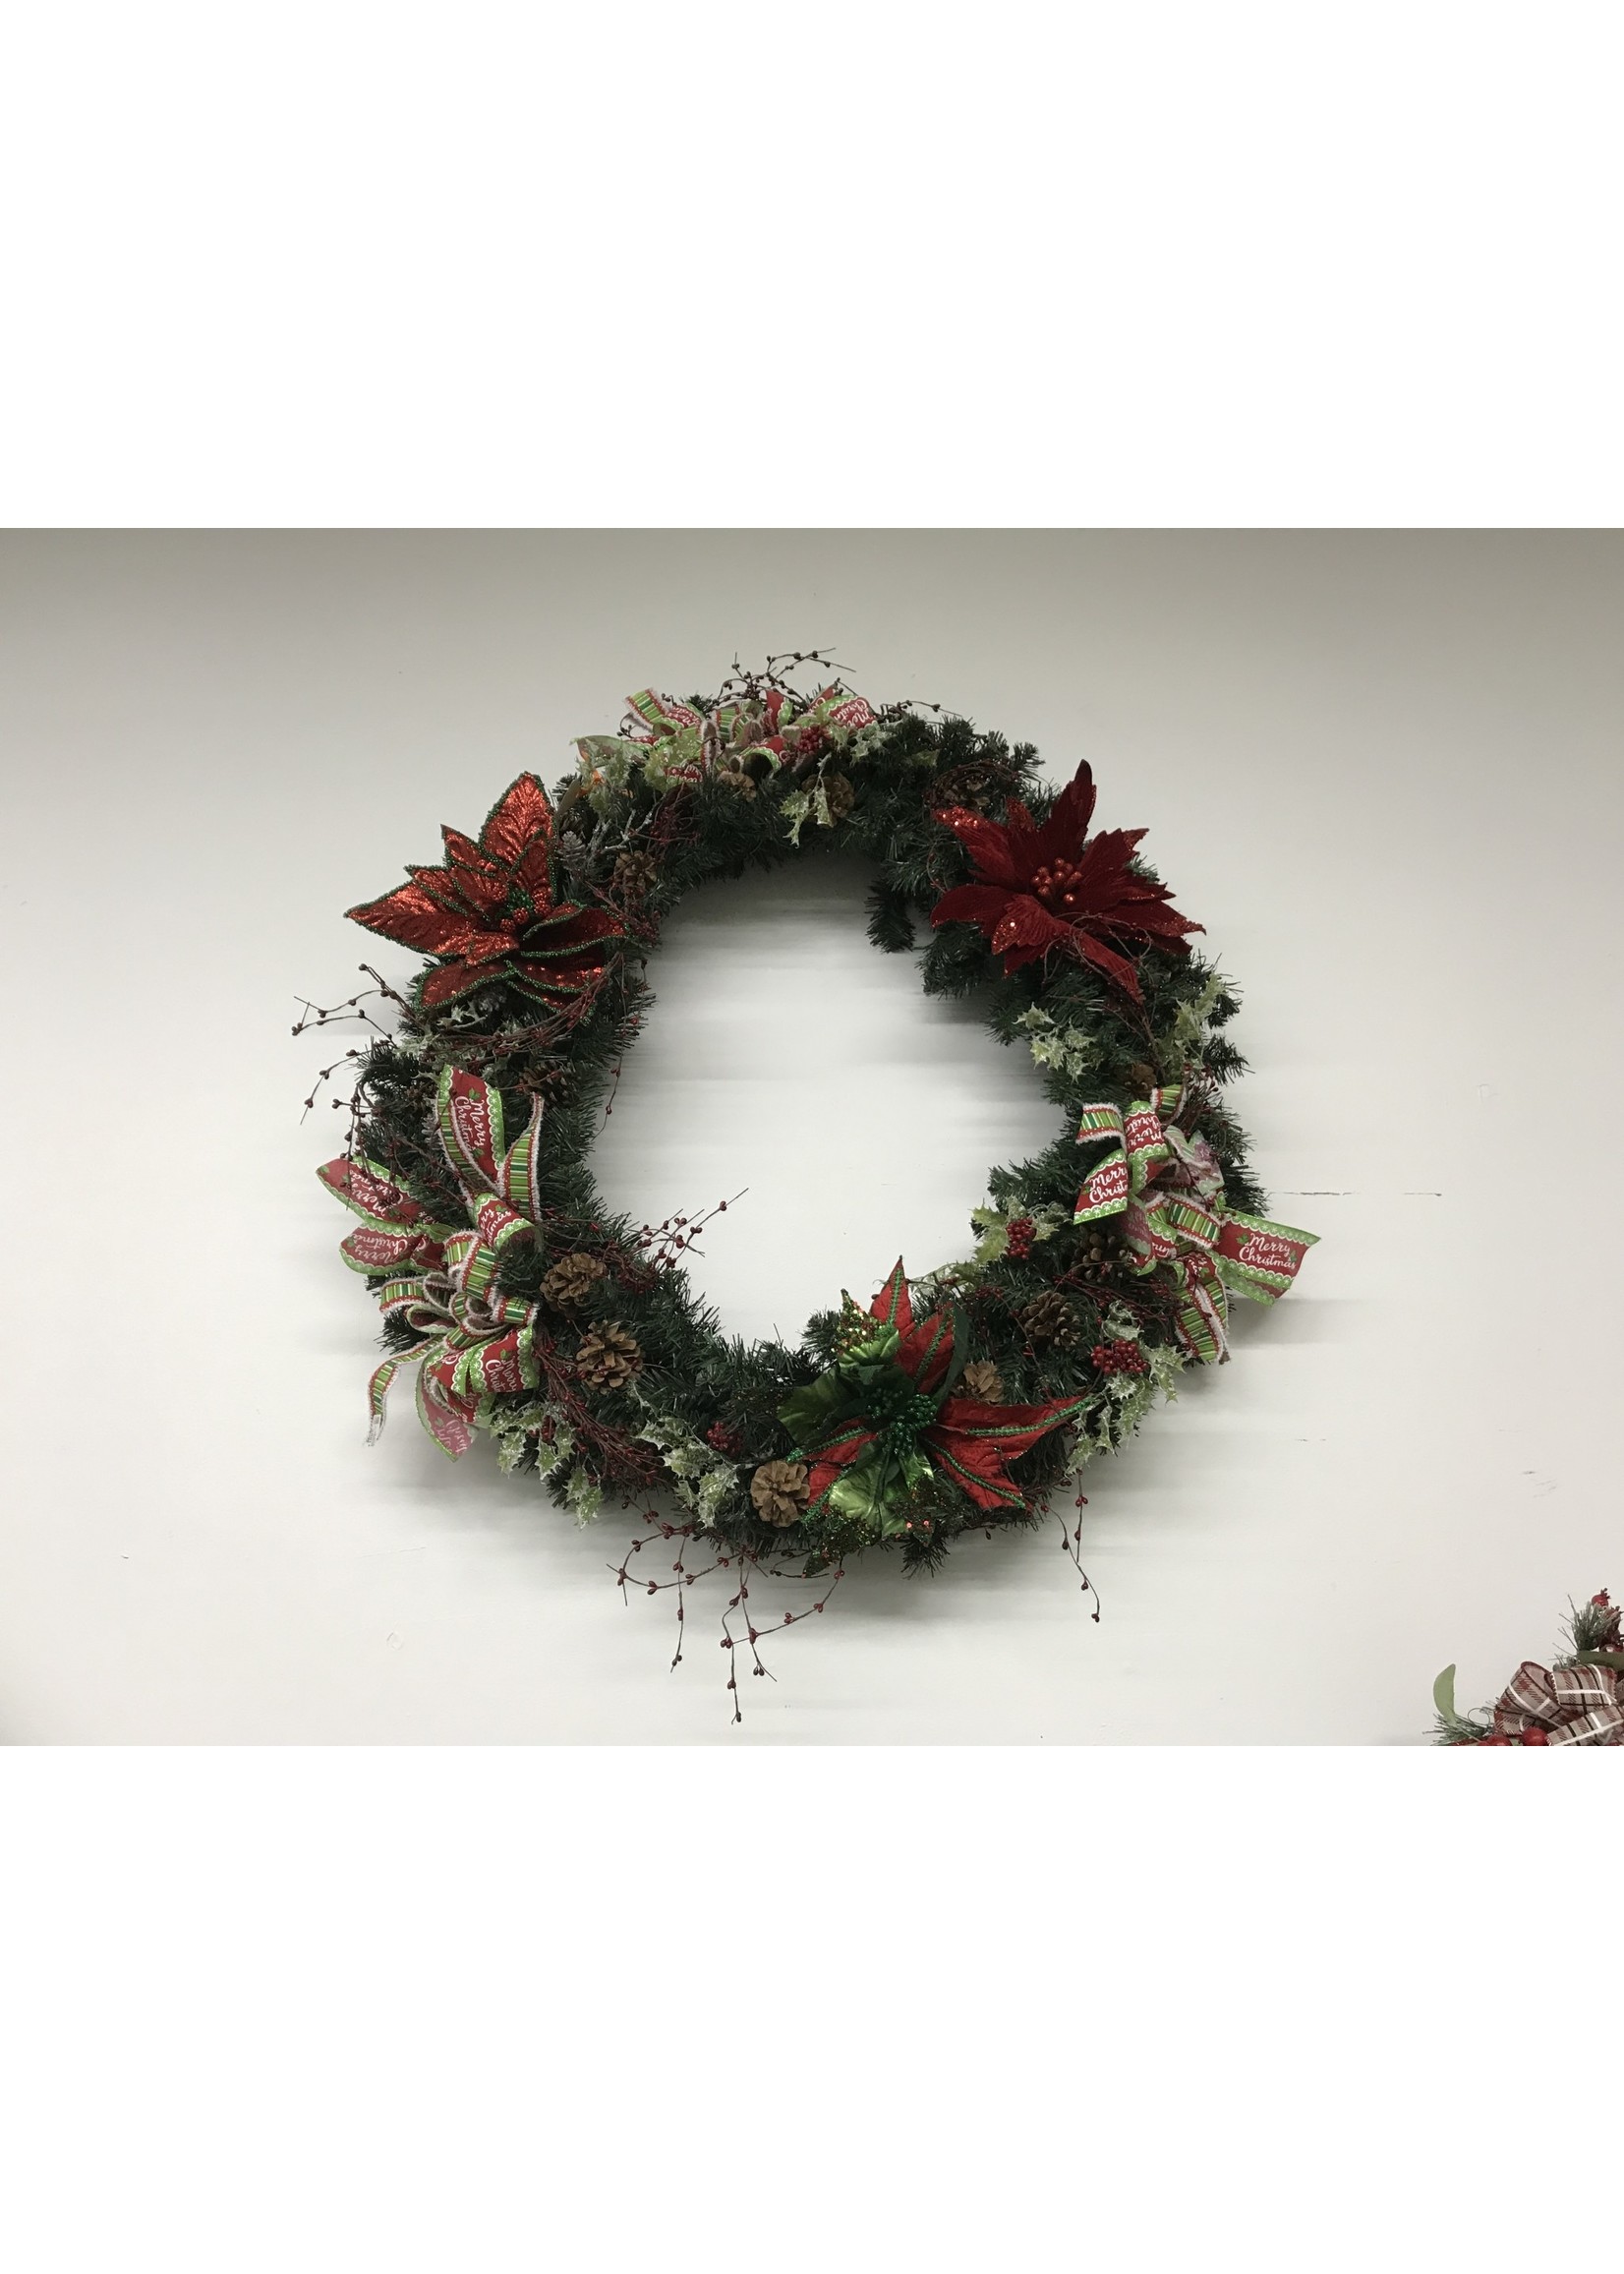 My New Favorite Thing Wreath Evergreen with Red Poinsettias and Merry Christmas Ribbon 34 inches